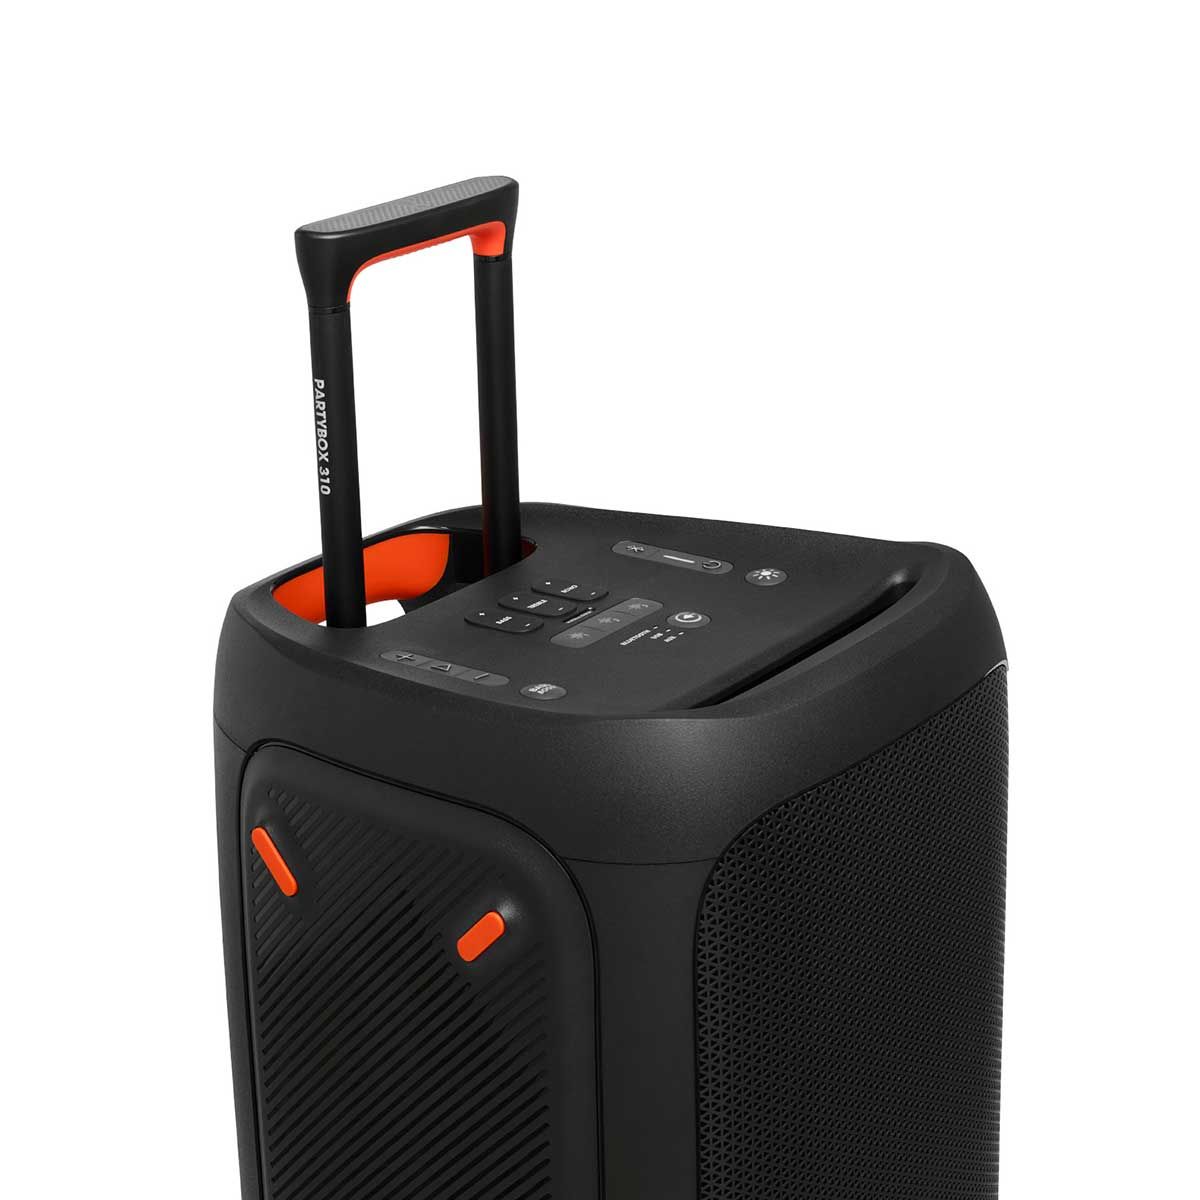 New JBL Partybox on the go Essential - First look, sound test, review💥 